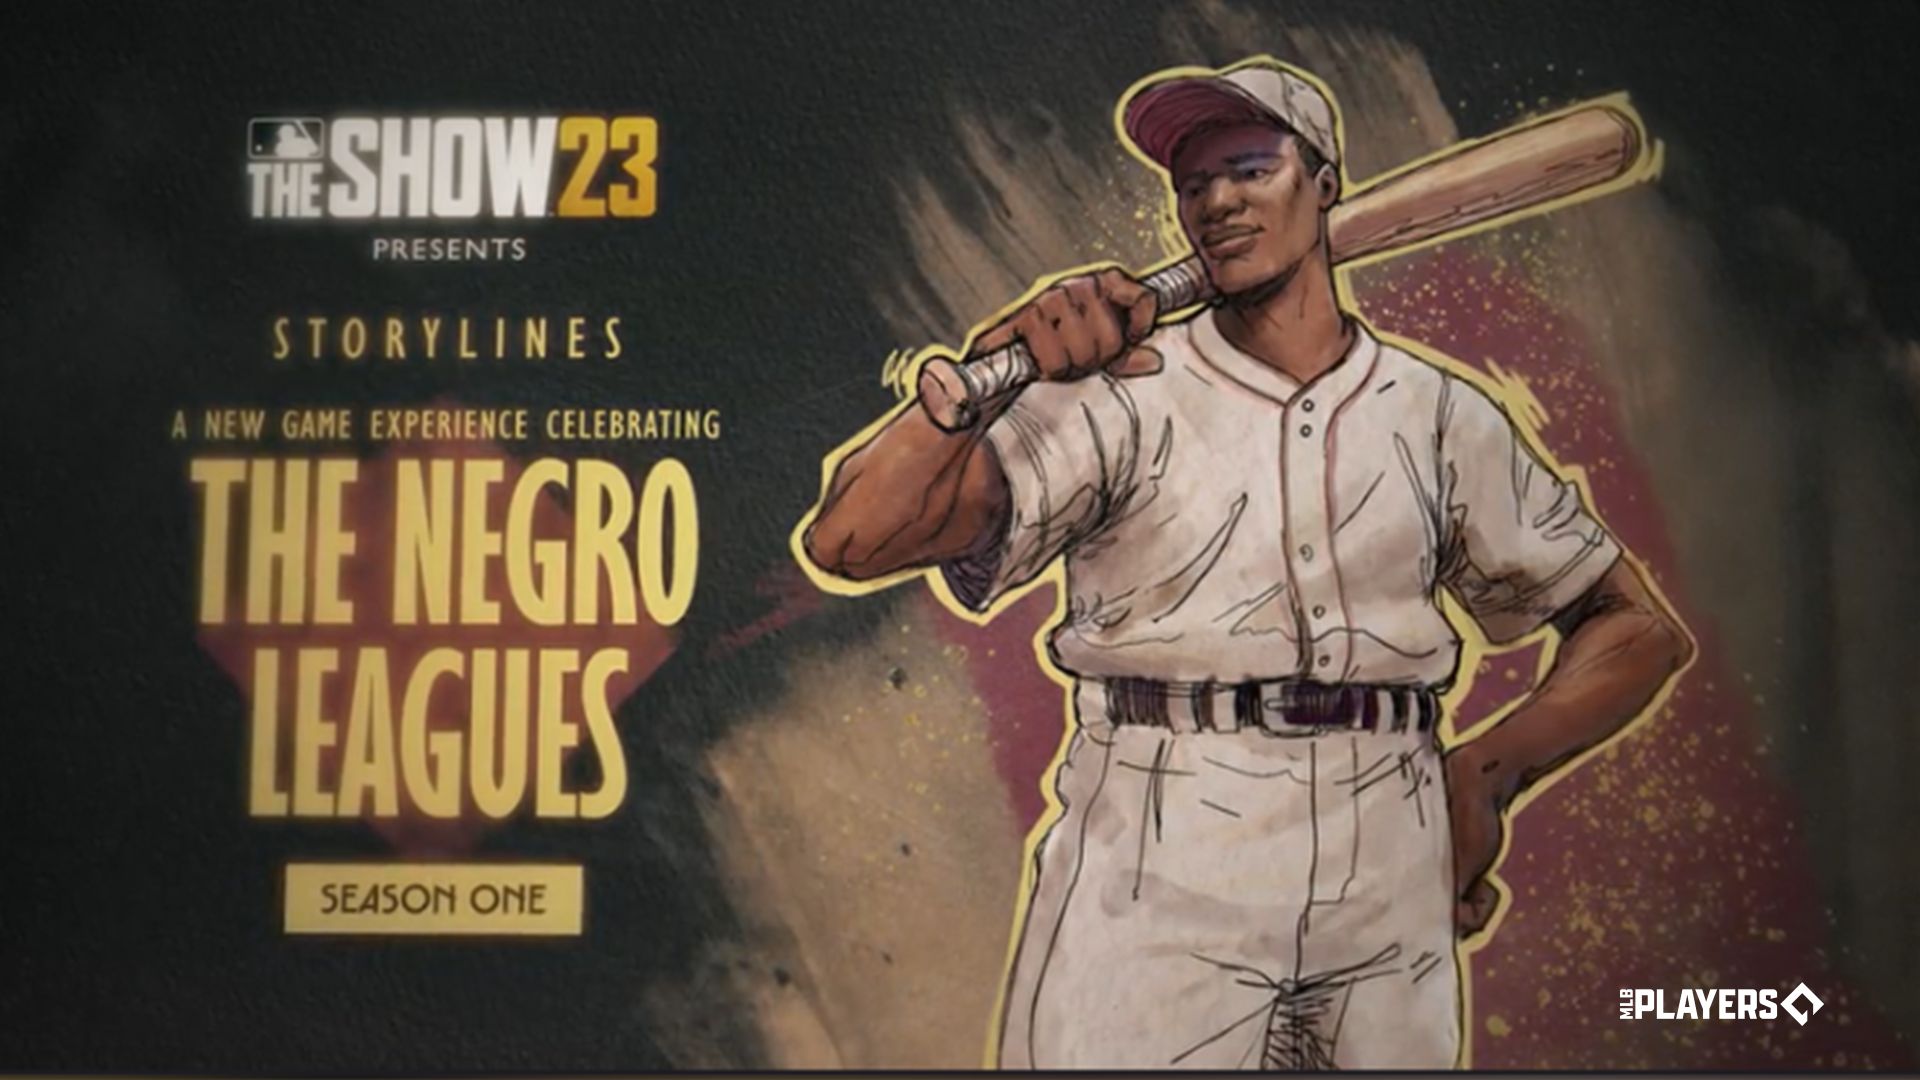 MLB The Show 23's Negro Leagues Feature is the Start of a Powerful